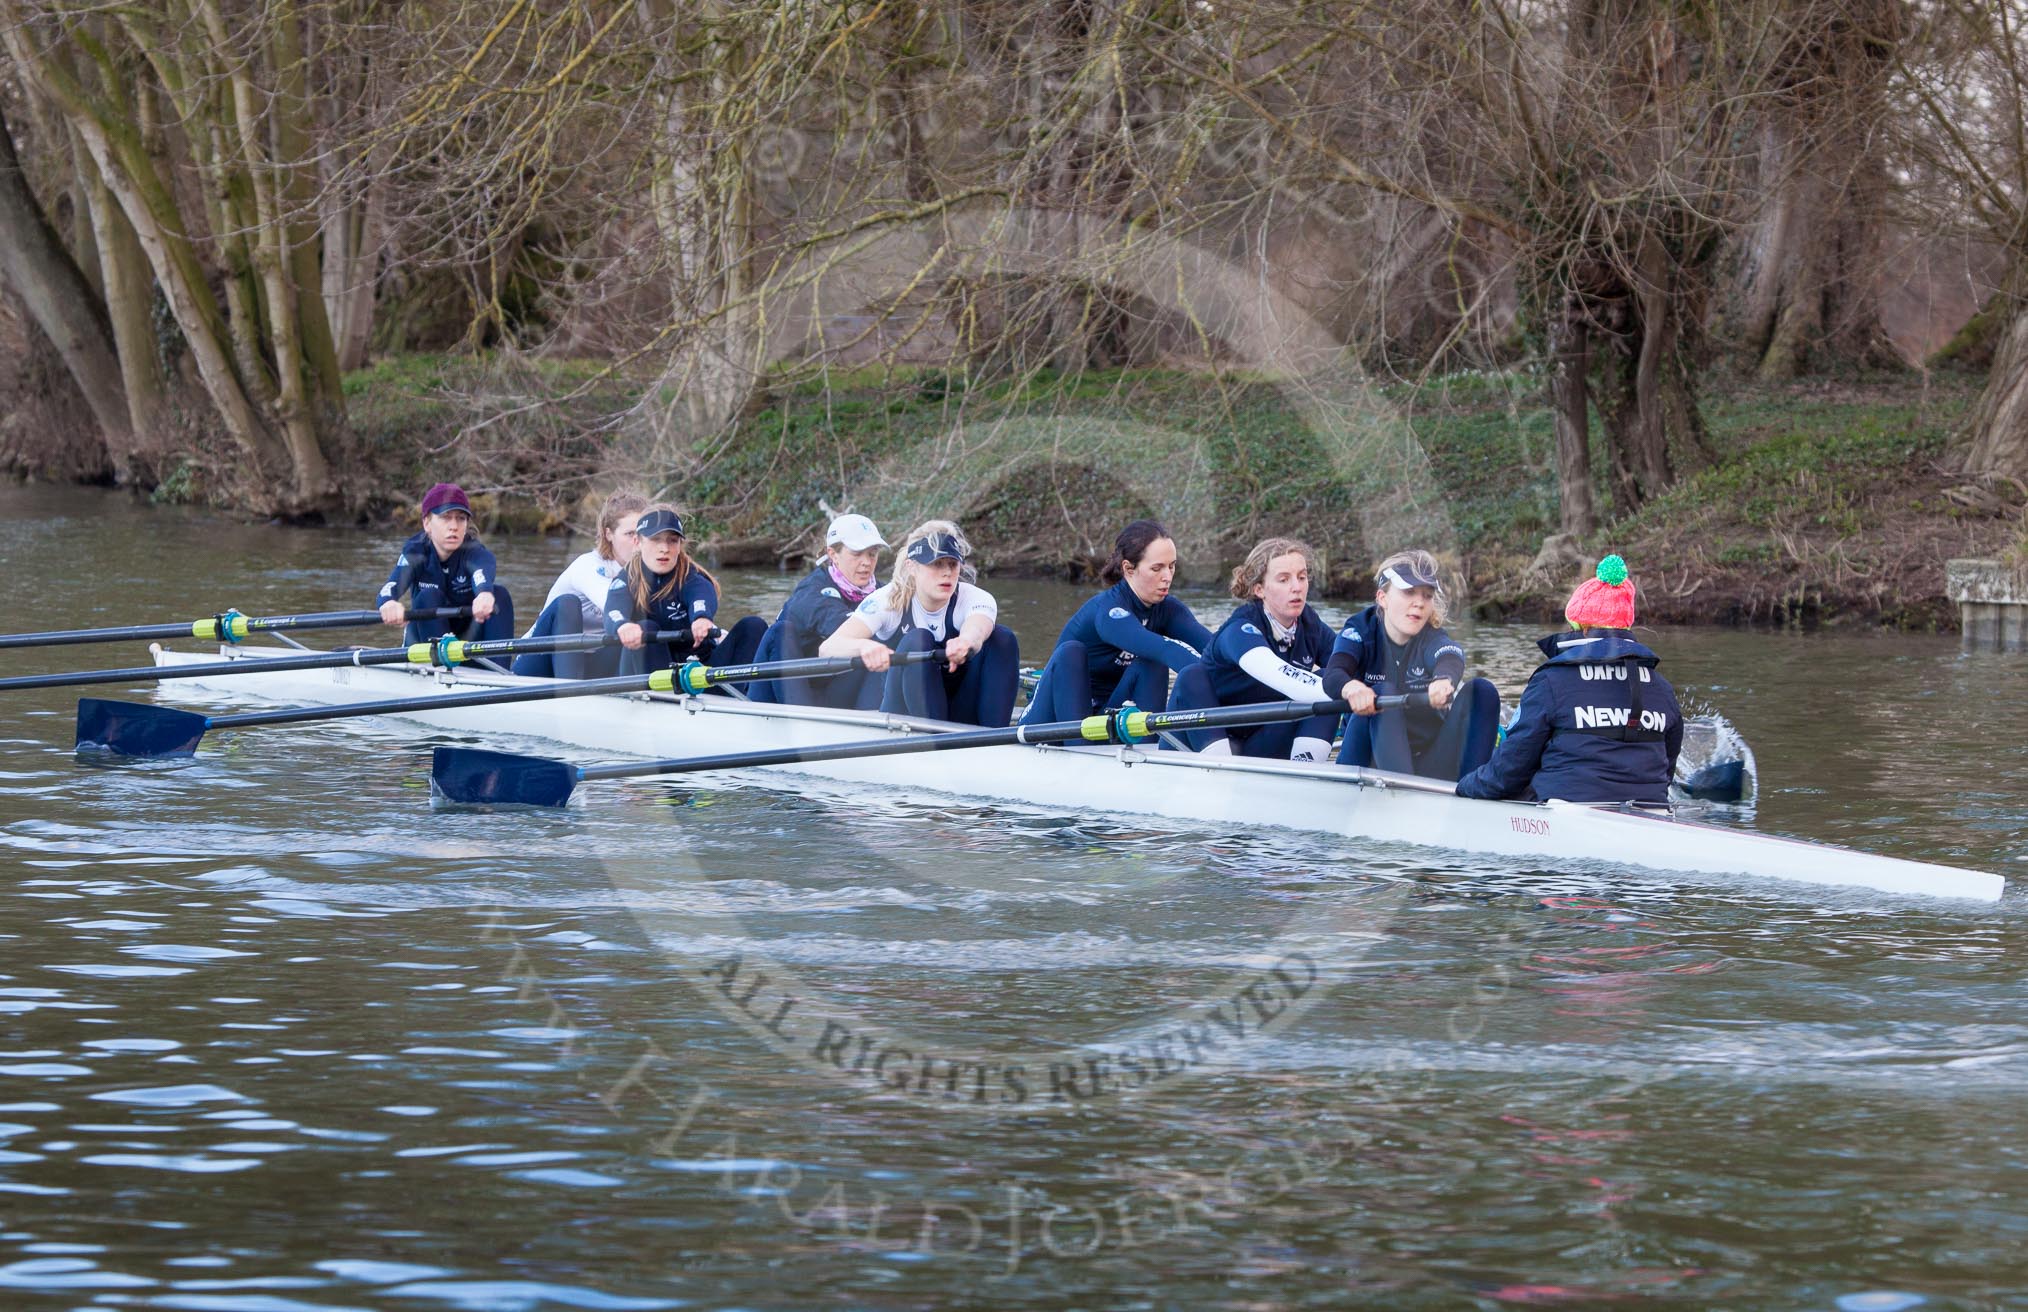 The Boat Race season 2013 - OUWBC training: The OUWBC Blue Boat during the training session - bow Mariann Novak, Alice Carrington-Windo, Mary Foord-Weston, Jo Lee, Amy Varney, Harriet Keane, Anastasia Chitty, stroke Maxie Scheske, and cox Katie Apfelbaum..
River Thames,
Wallingford,
Oxfordshire,
United Kingdom,
on 13 March 2013 at 17:12, image #102